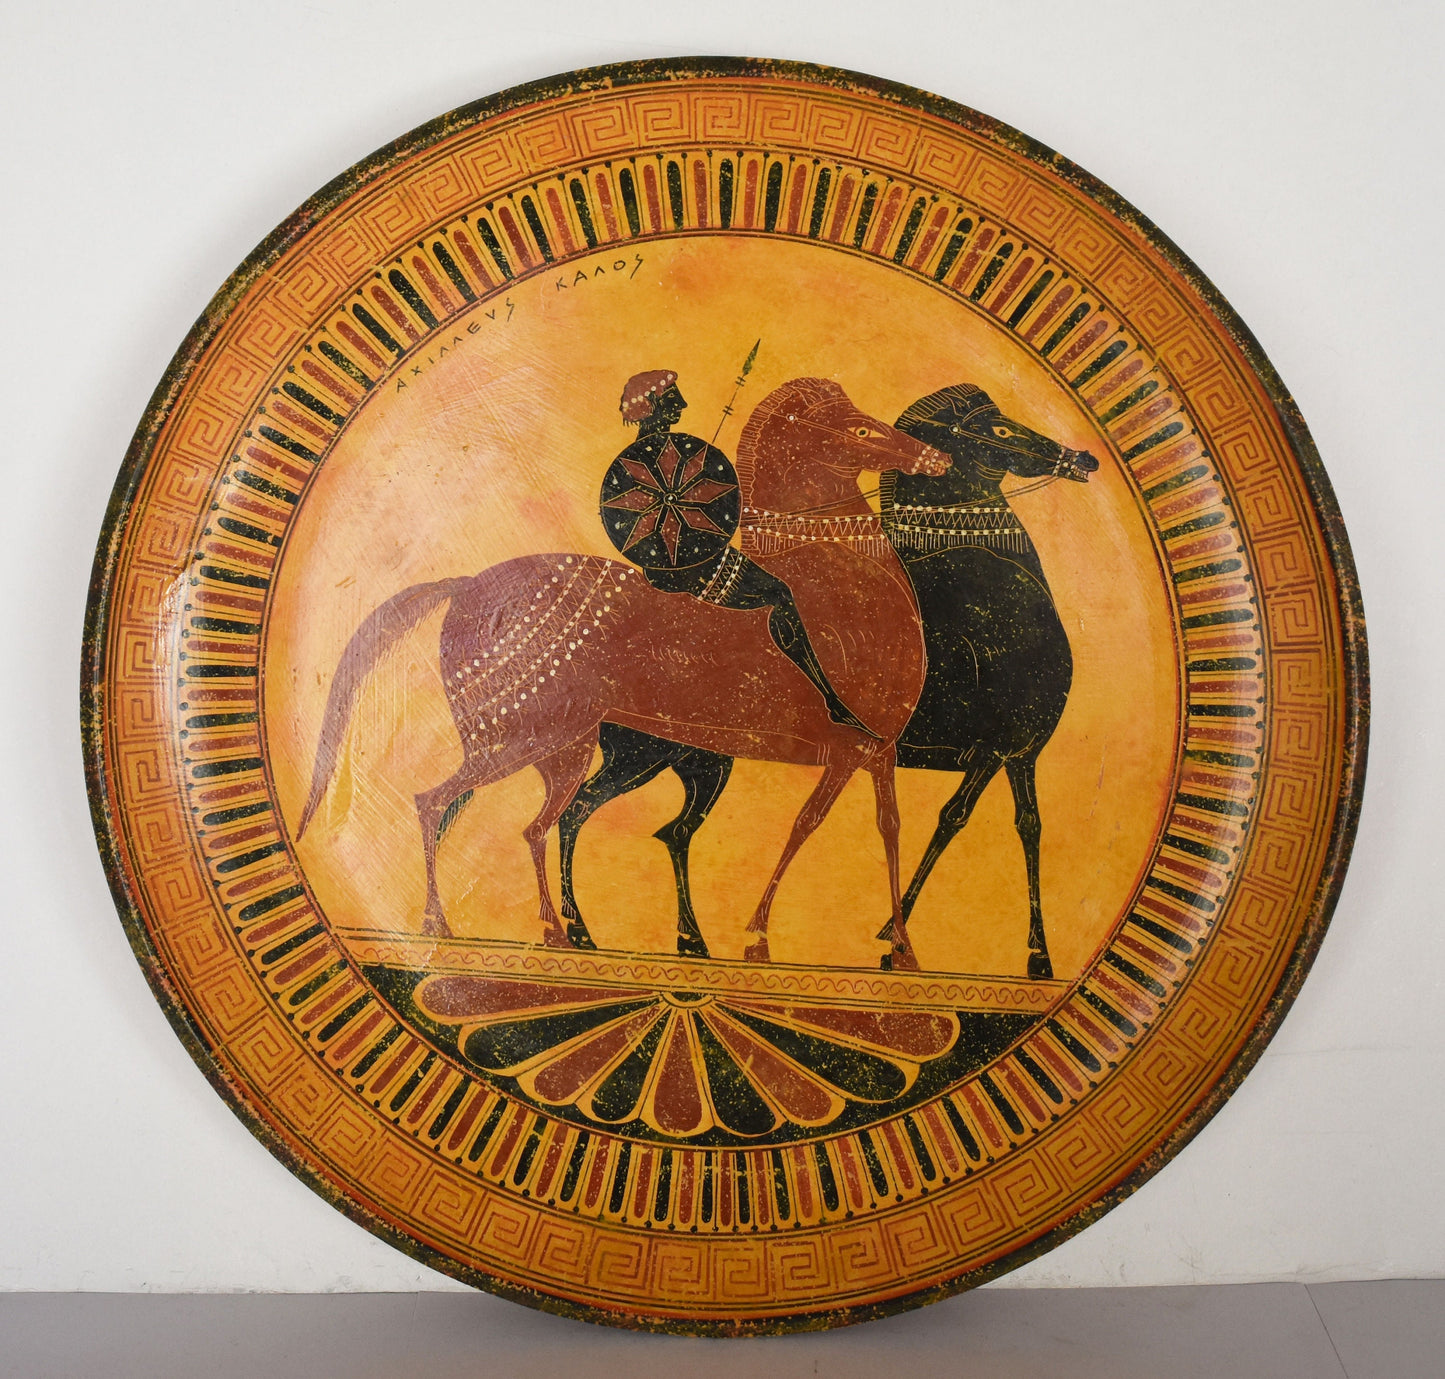 Achilles with his Immortal Horses - Balius and Xanthus - Homer,Iliad - Meander - Classic Period, 600 BC - Ceramic plate - Handmade in Greece